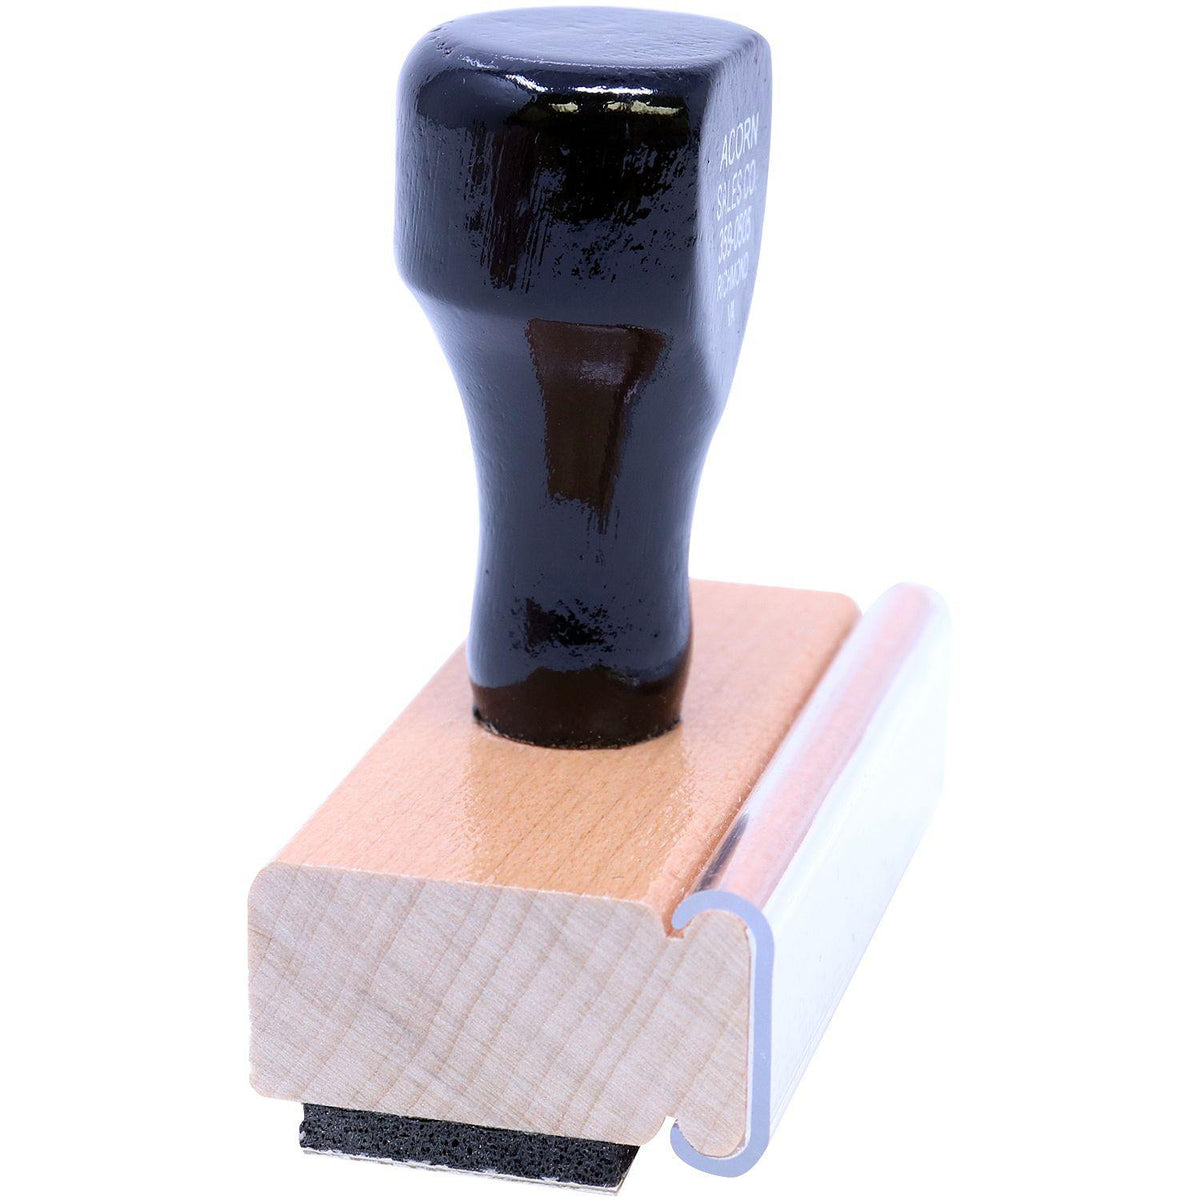 Large Void with Box Rubber Stamp - Engineer Seal Stamps - Brand_Acorn, Impression Size_Large, Stamp Type_Regular Stamp, Type of Use_Business, Type of Use_General, Type of Use_Office, Type of Use_Professional